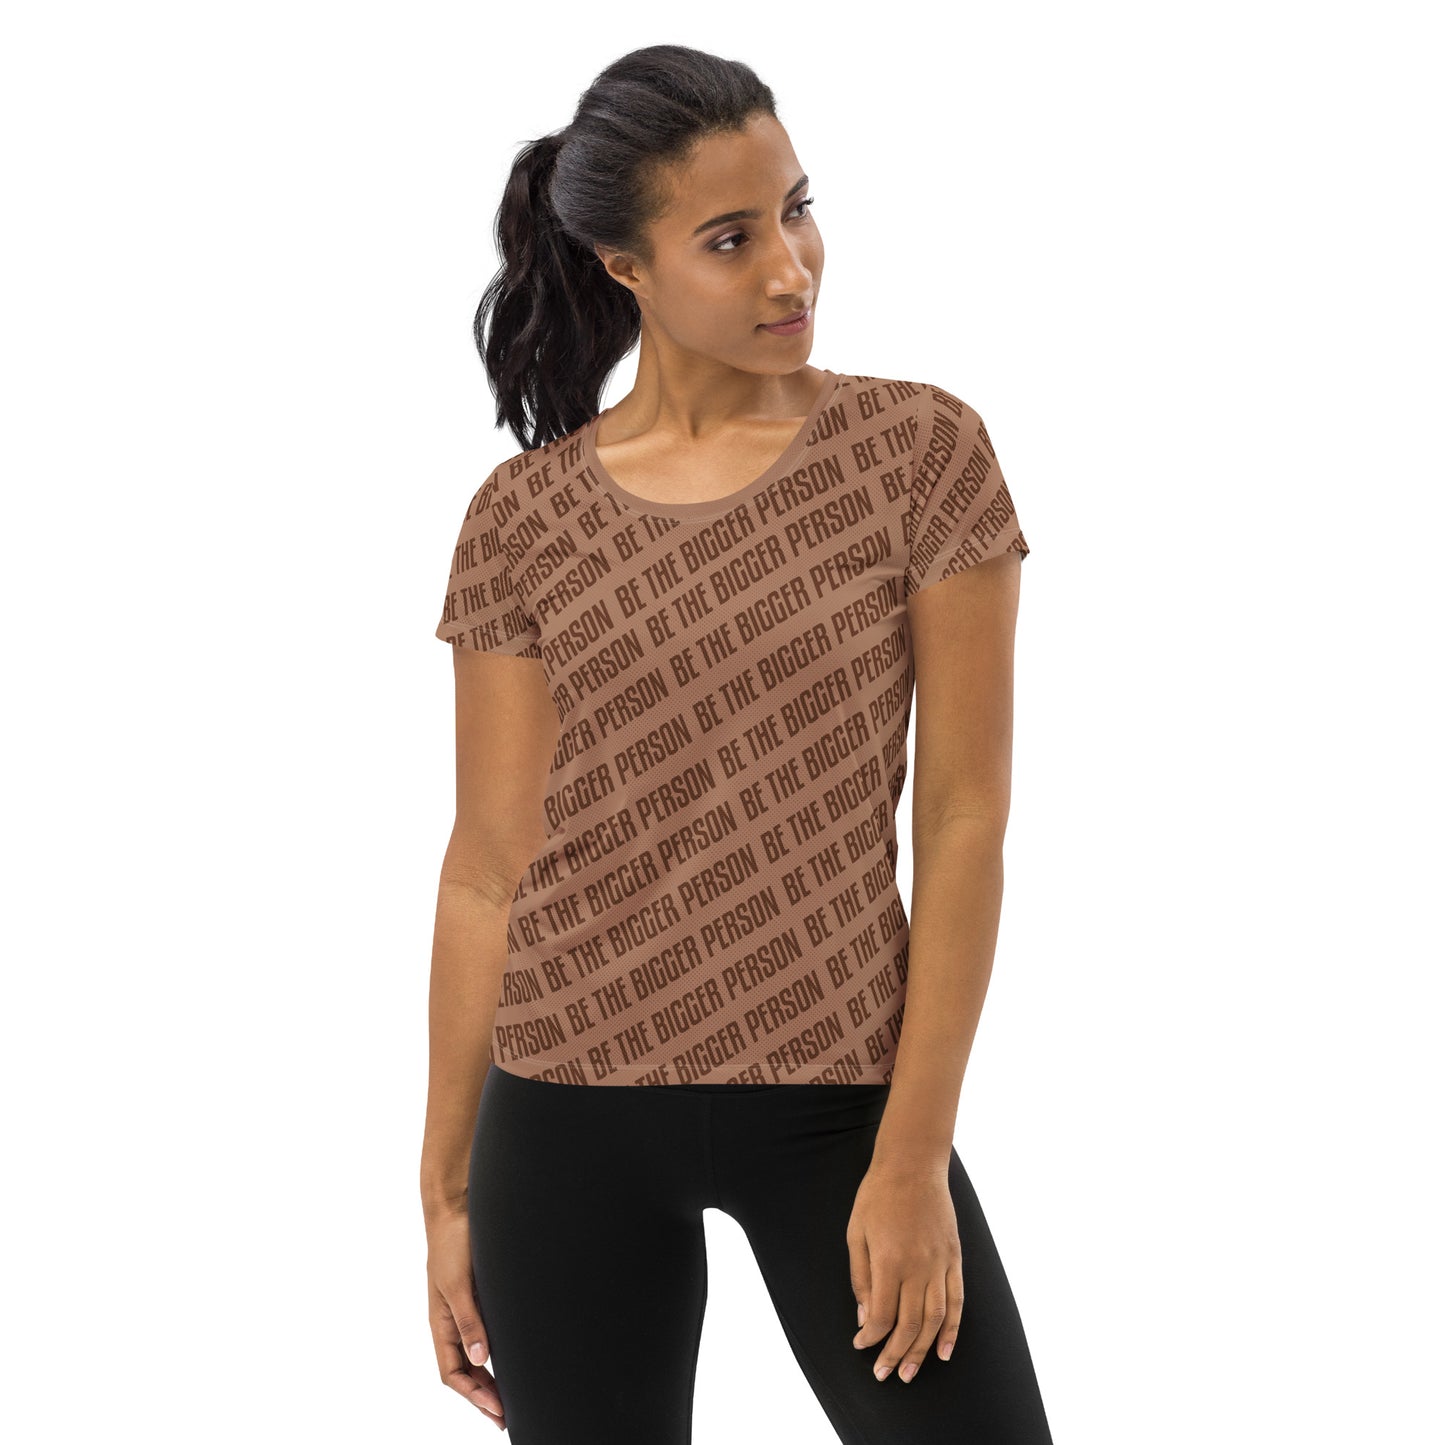 BROWN NOSER - Women's Athletic T-shirt